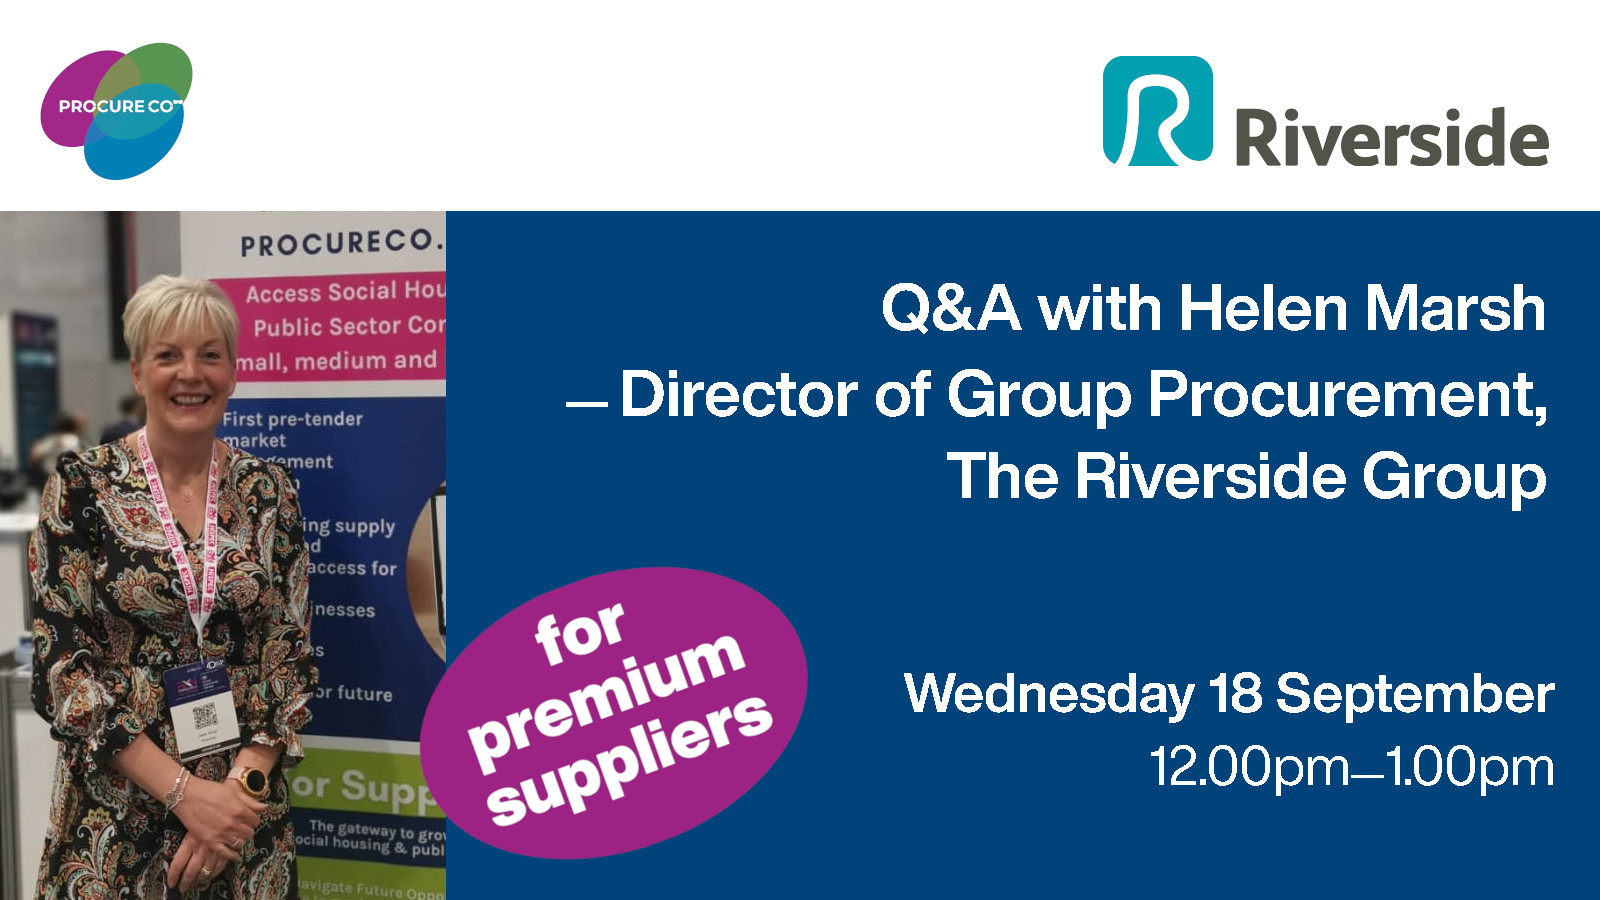 Q&A with Helen Marsh, Director of Group Procurement, The Riverside Group